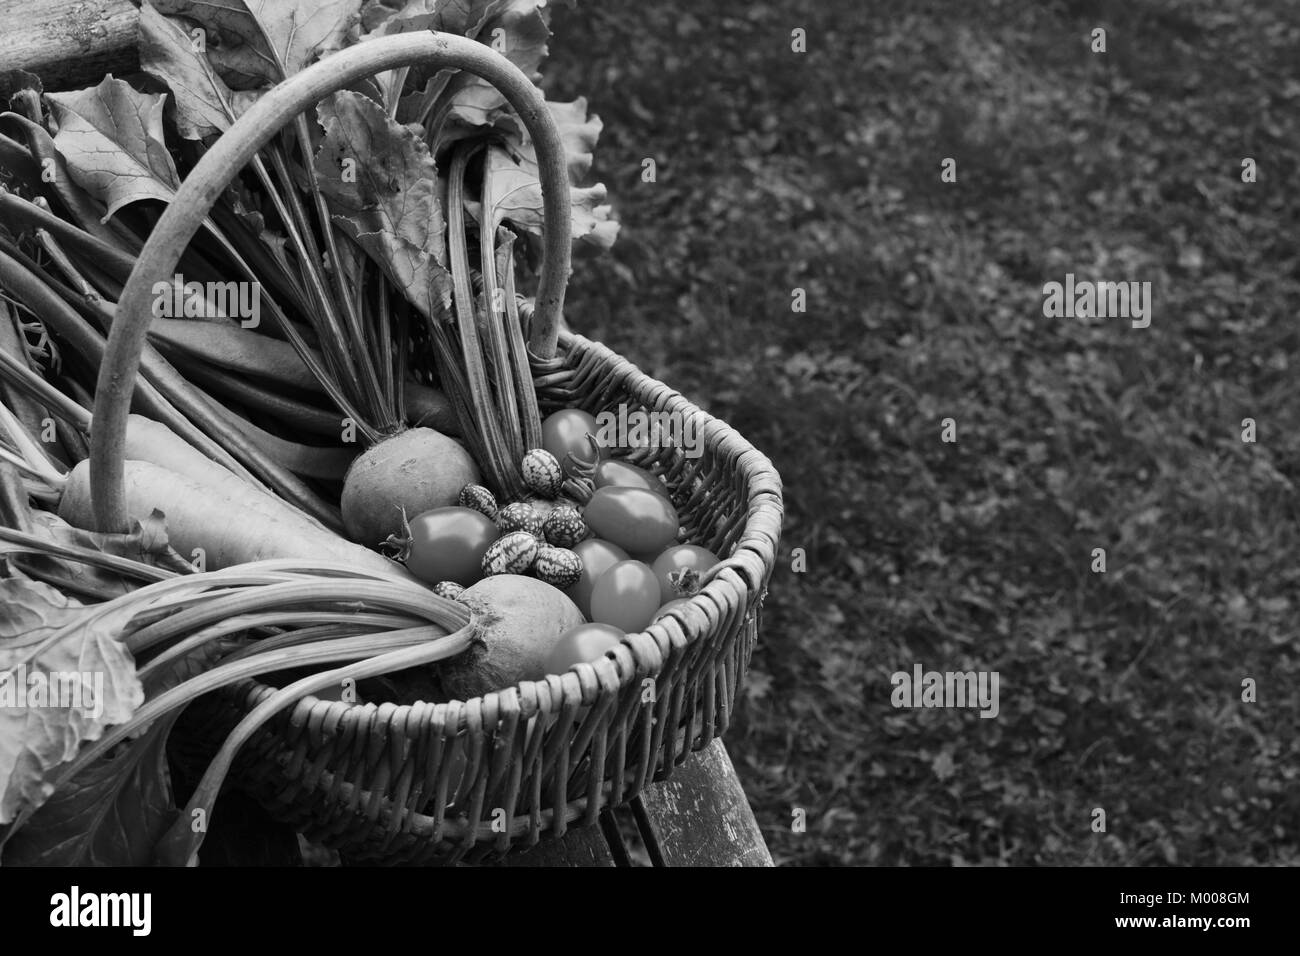 Woven basket filled with freshly harvested vegetables from an allotment sits on a wooden garden bench; copy space on grass - monochrome processing Stock Photo